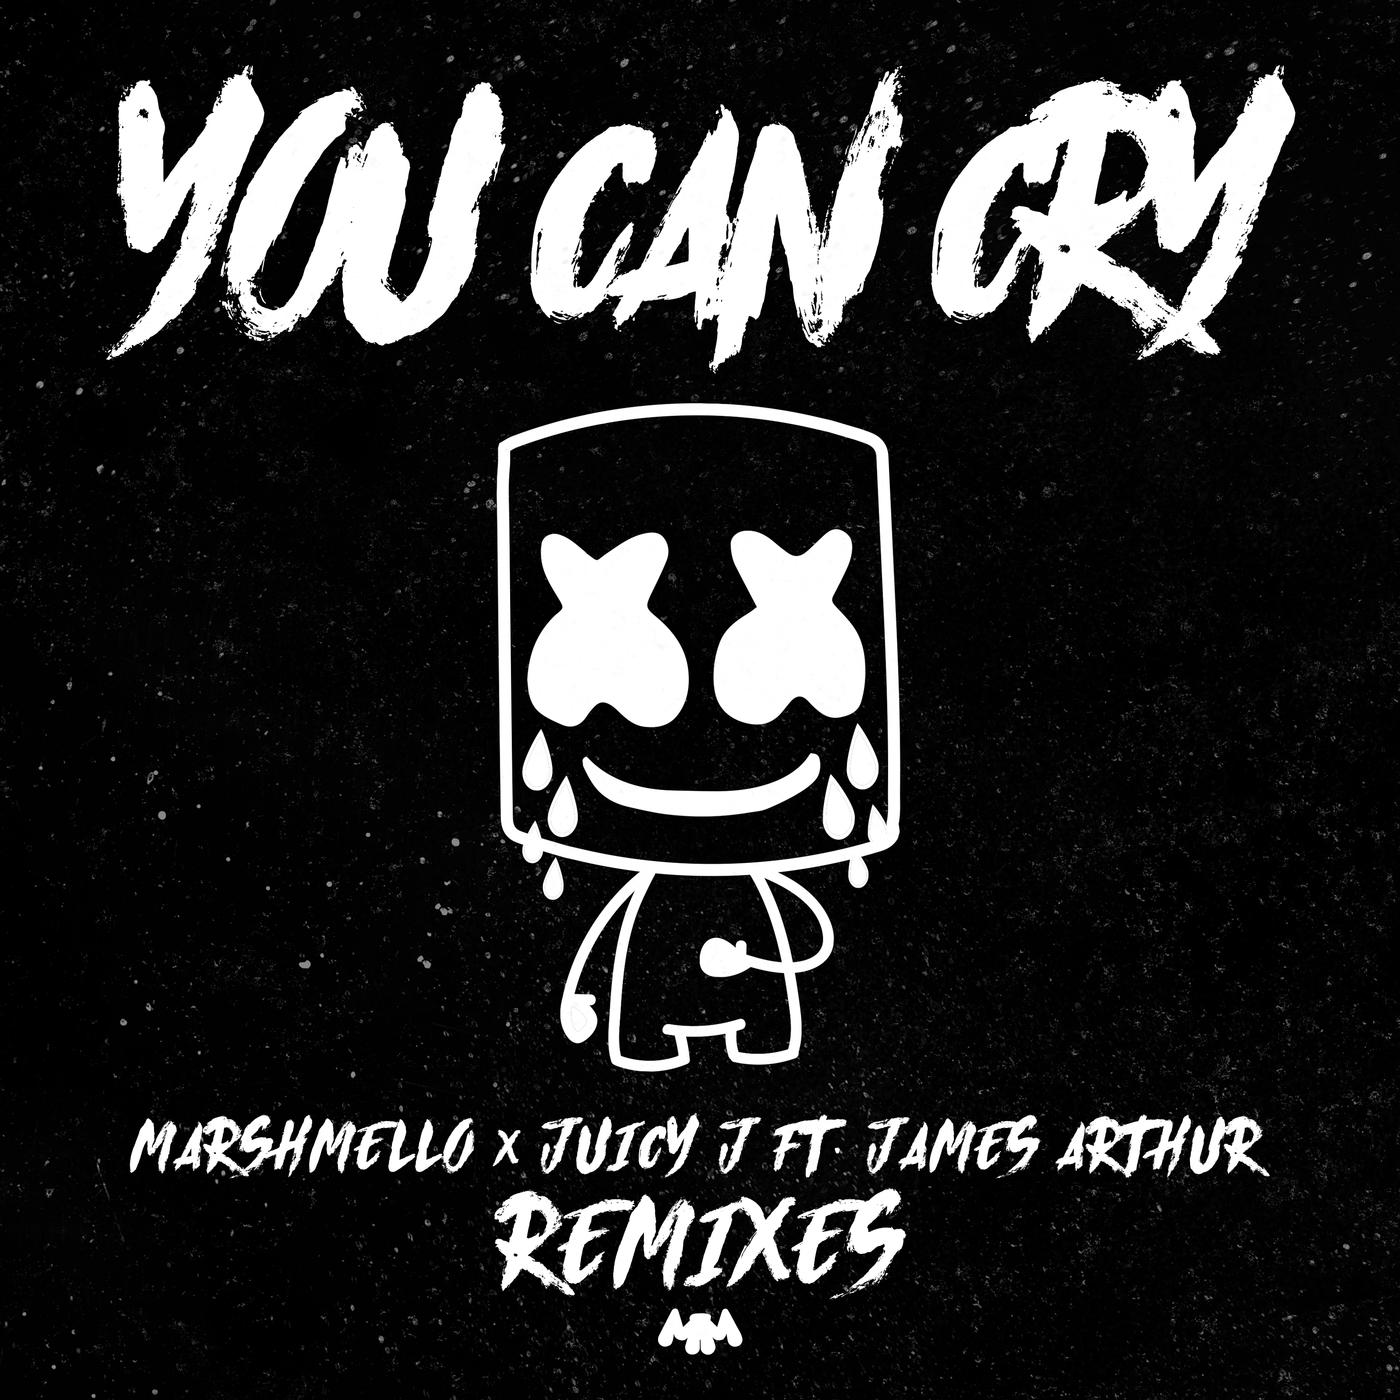 Marshmello - You Can Cry (SUMR CAMP Remix)